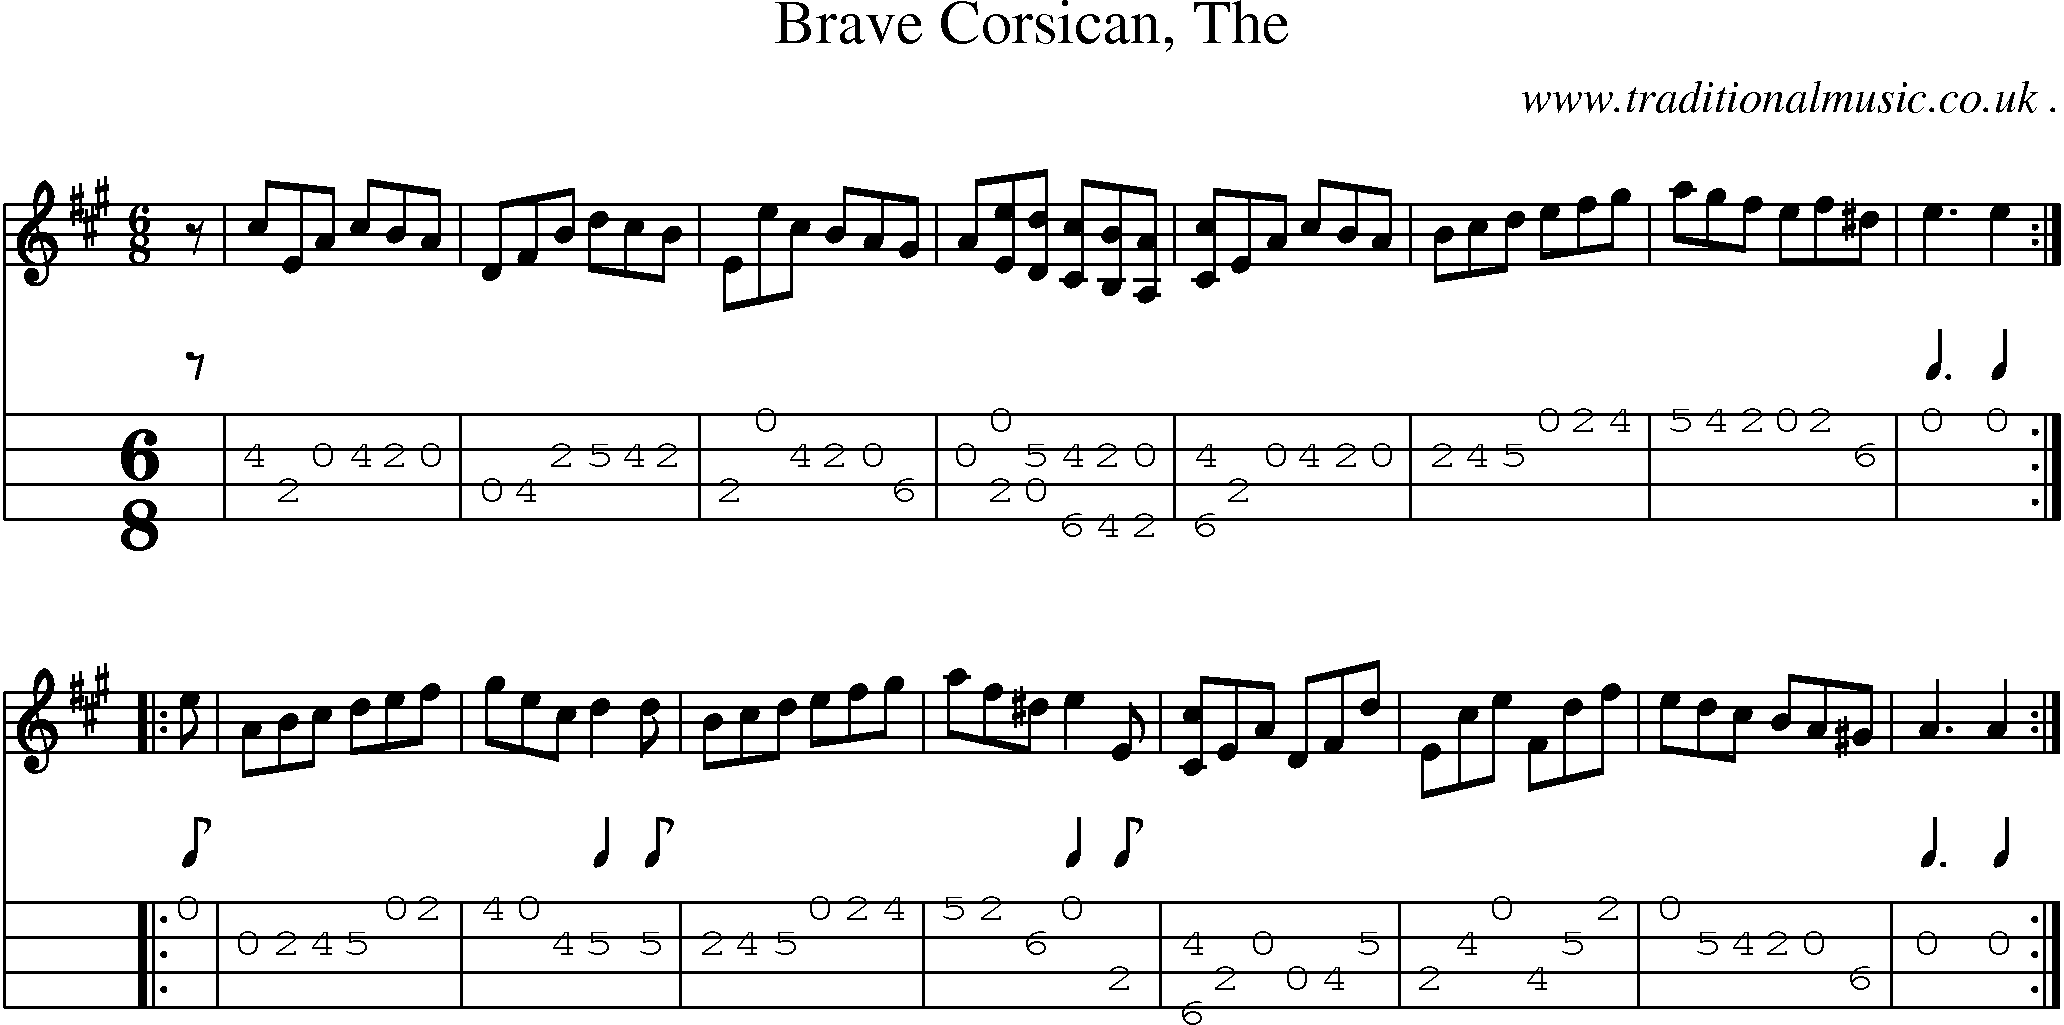 Sheet-music  score, Chords and Mandolin Tabs for Brave Corsican The